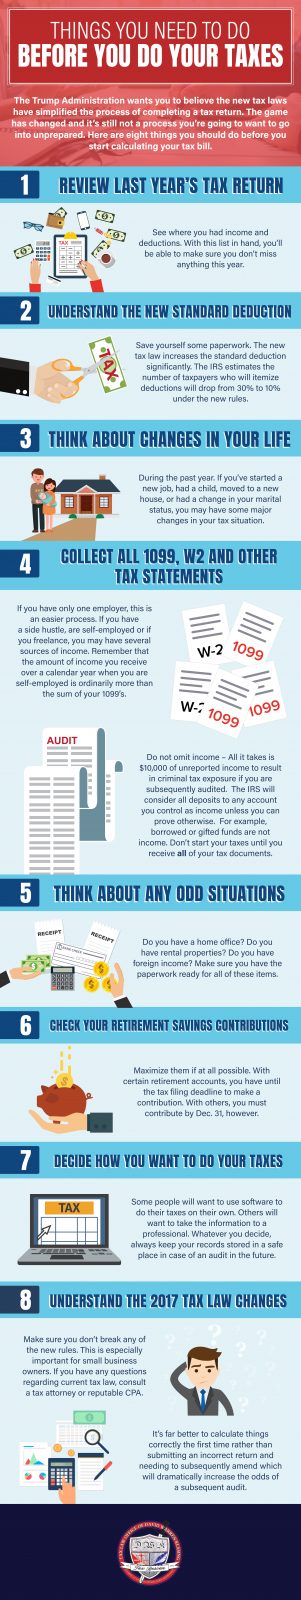   Things You Need to Do Before You Do Your Taxes